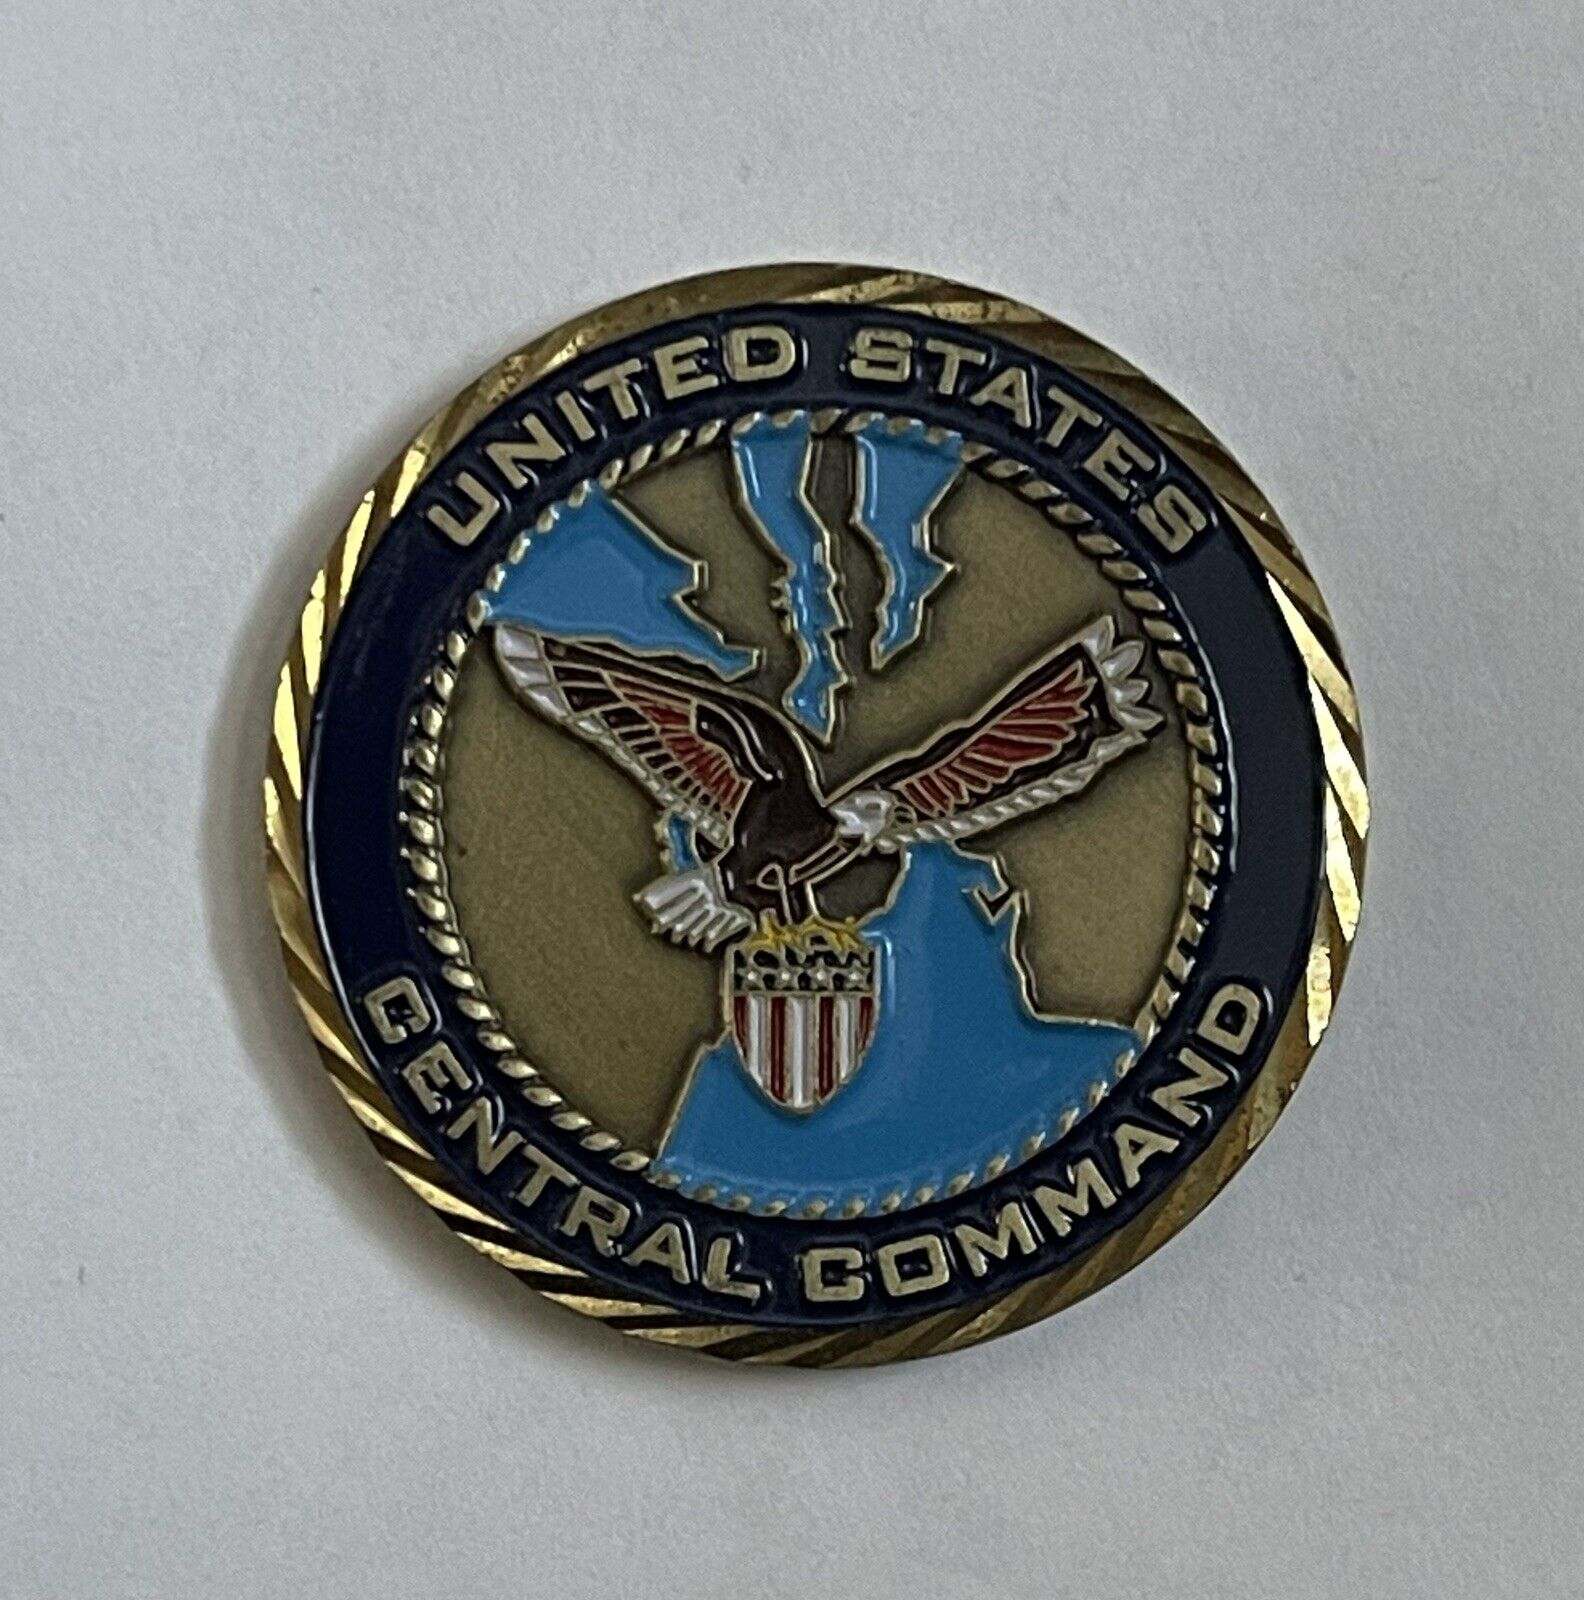 U. S. CENTRAL COMMAND - DIRECTOR of INTELLIGENCE CCJ2  CHALLENGE COIN 